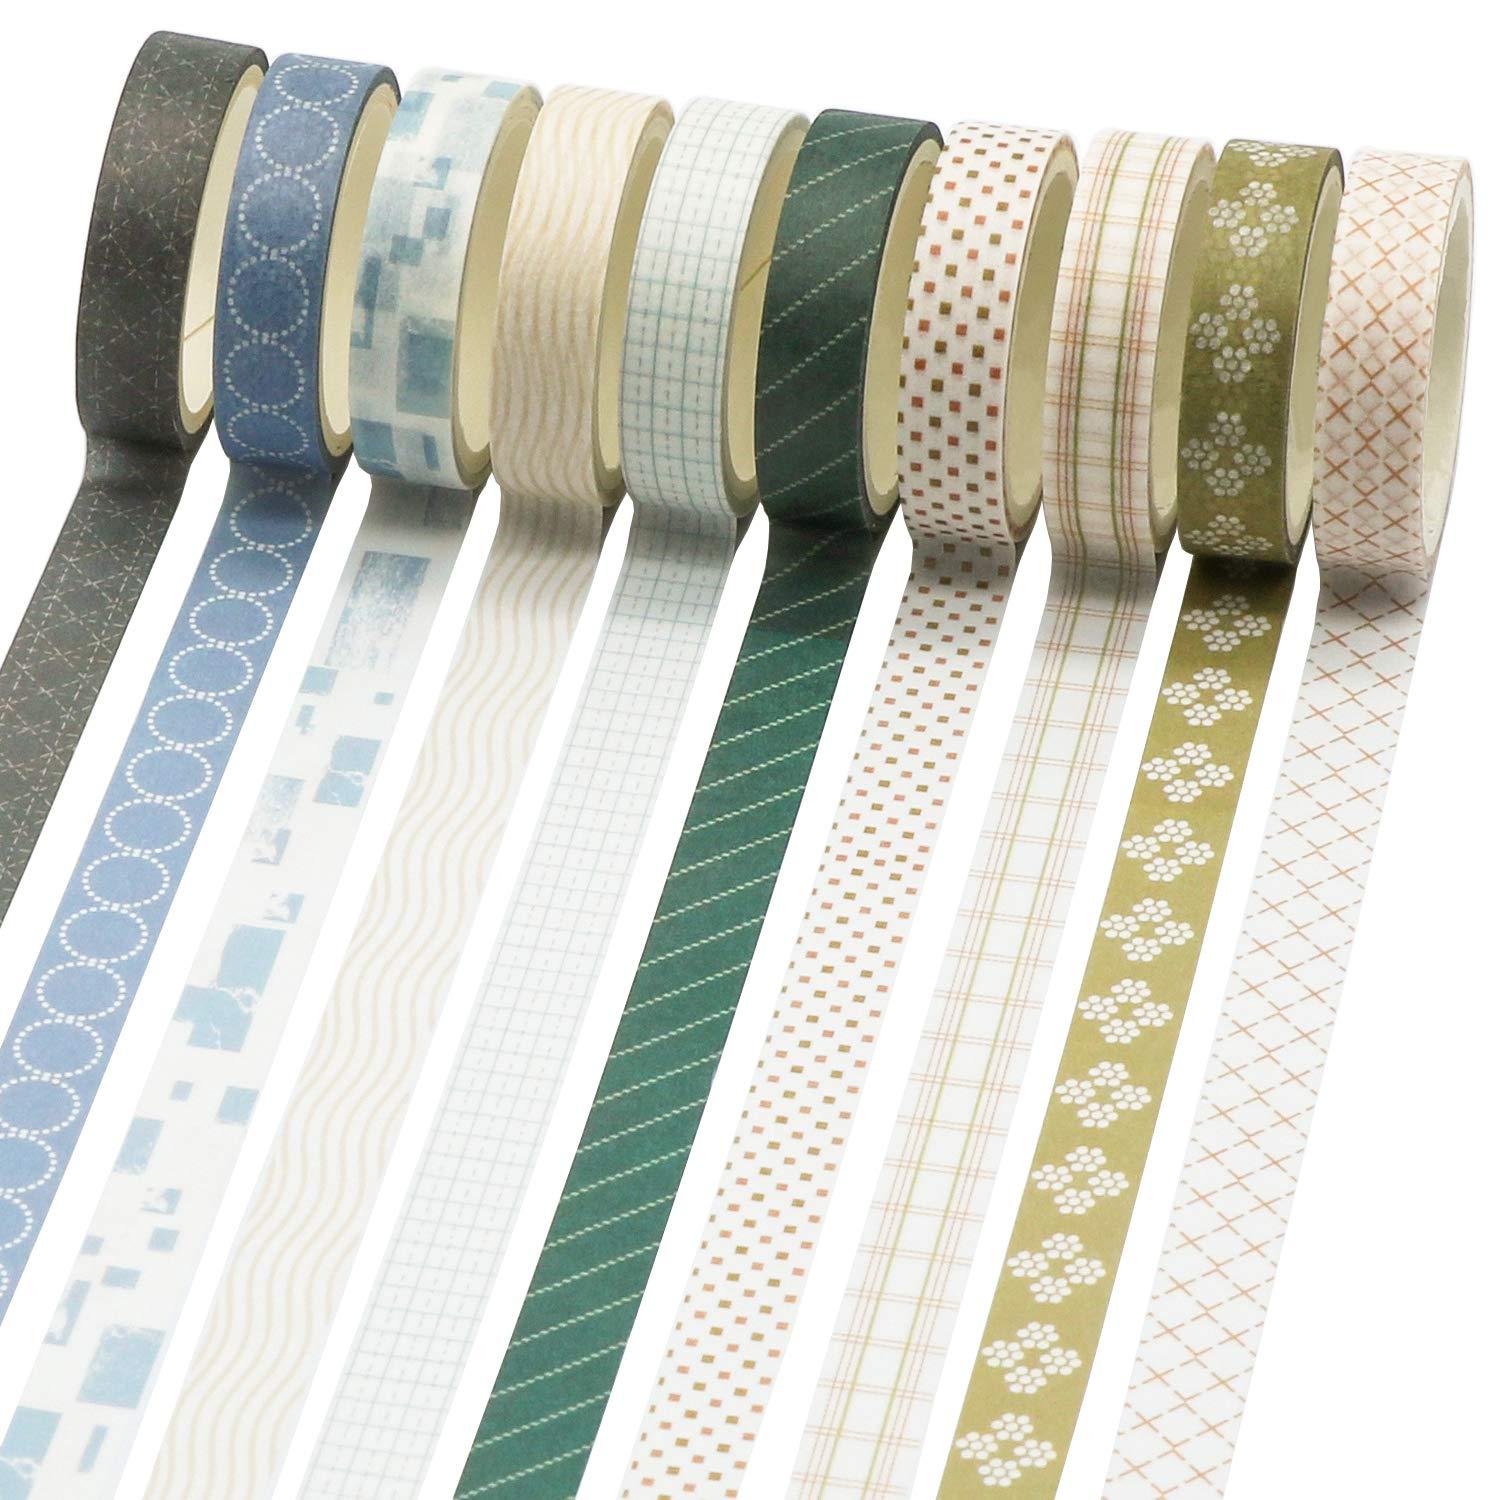 Knaid Grid Washi Tape Set, 14 Rolls of 15 mm Wide Decorative Colored M